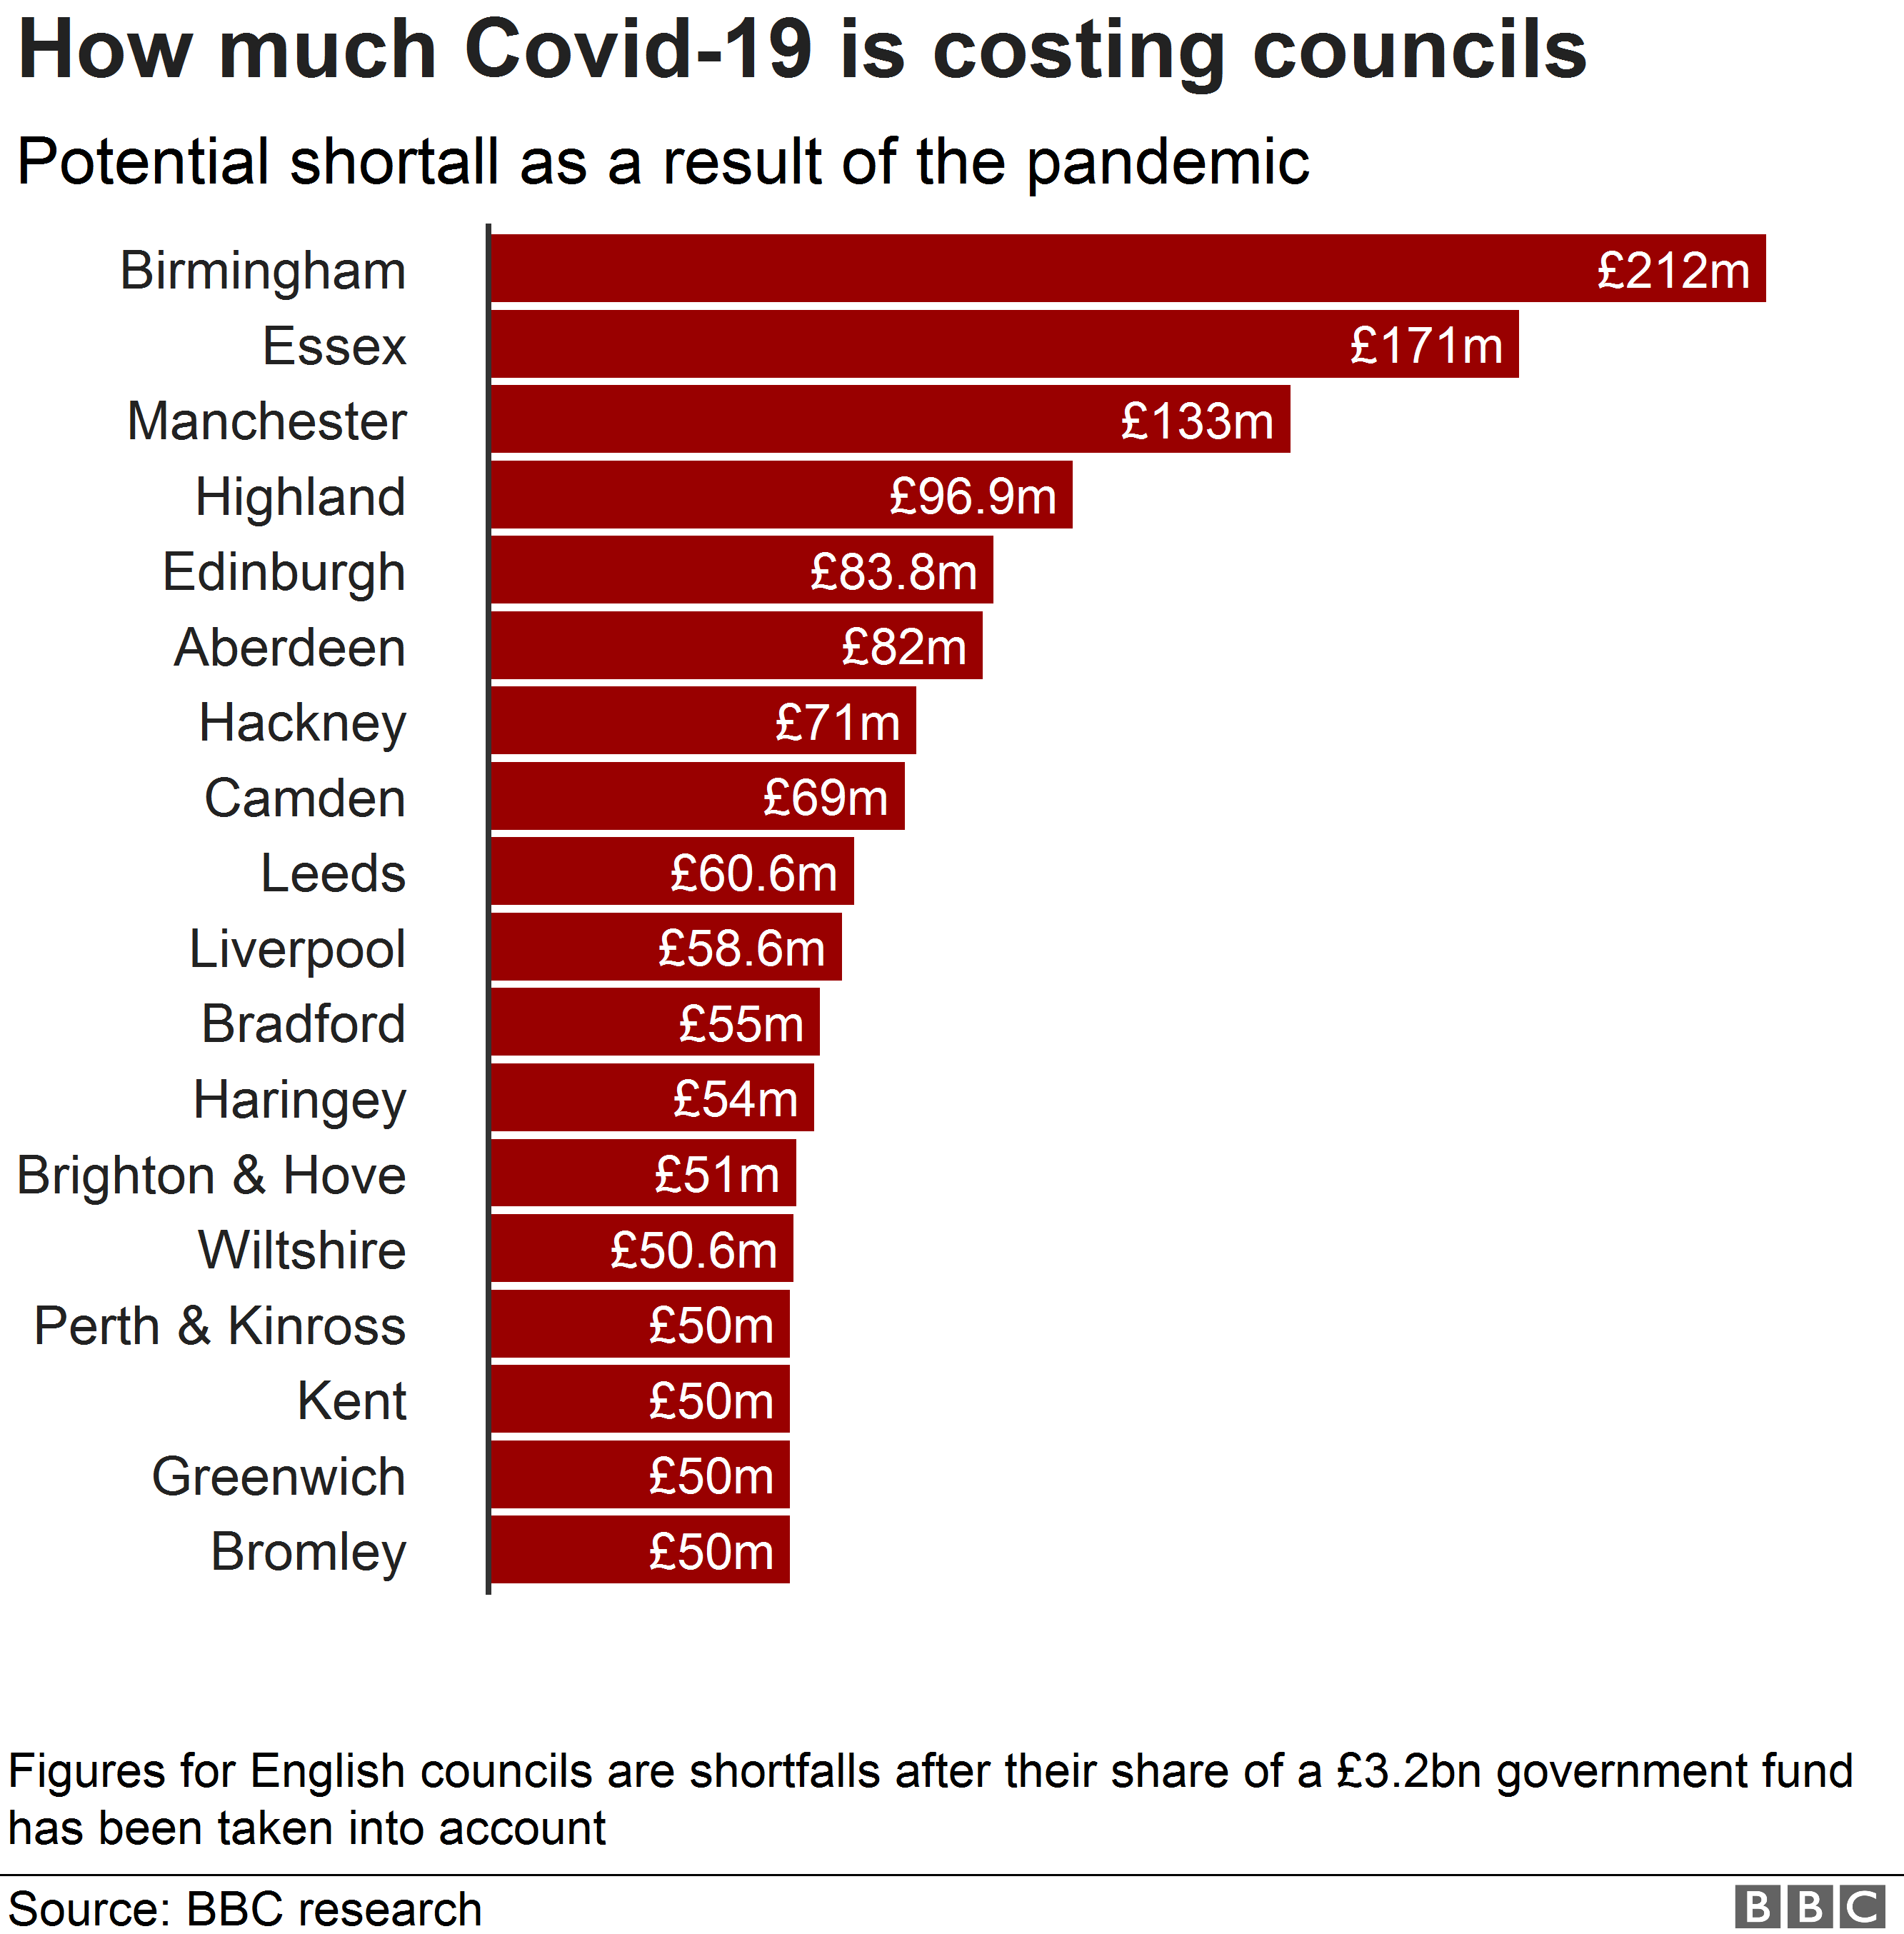 Chart showing councils with potential shortfalls of over £50m as a result of Covid-19